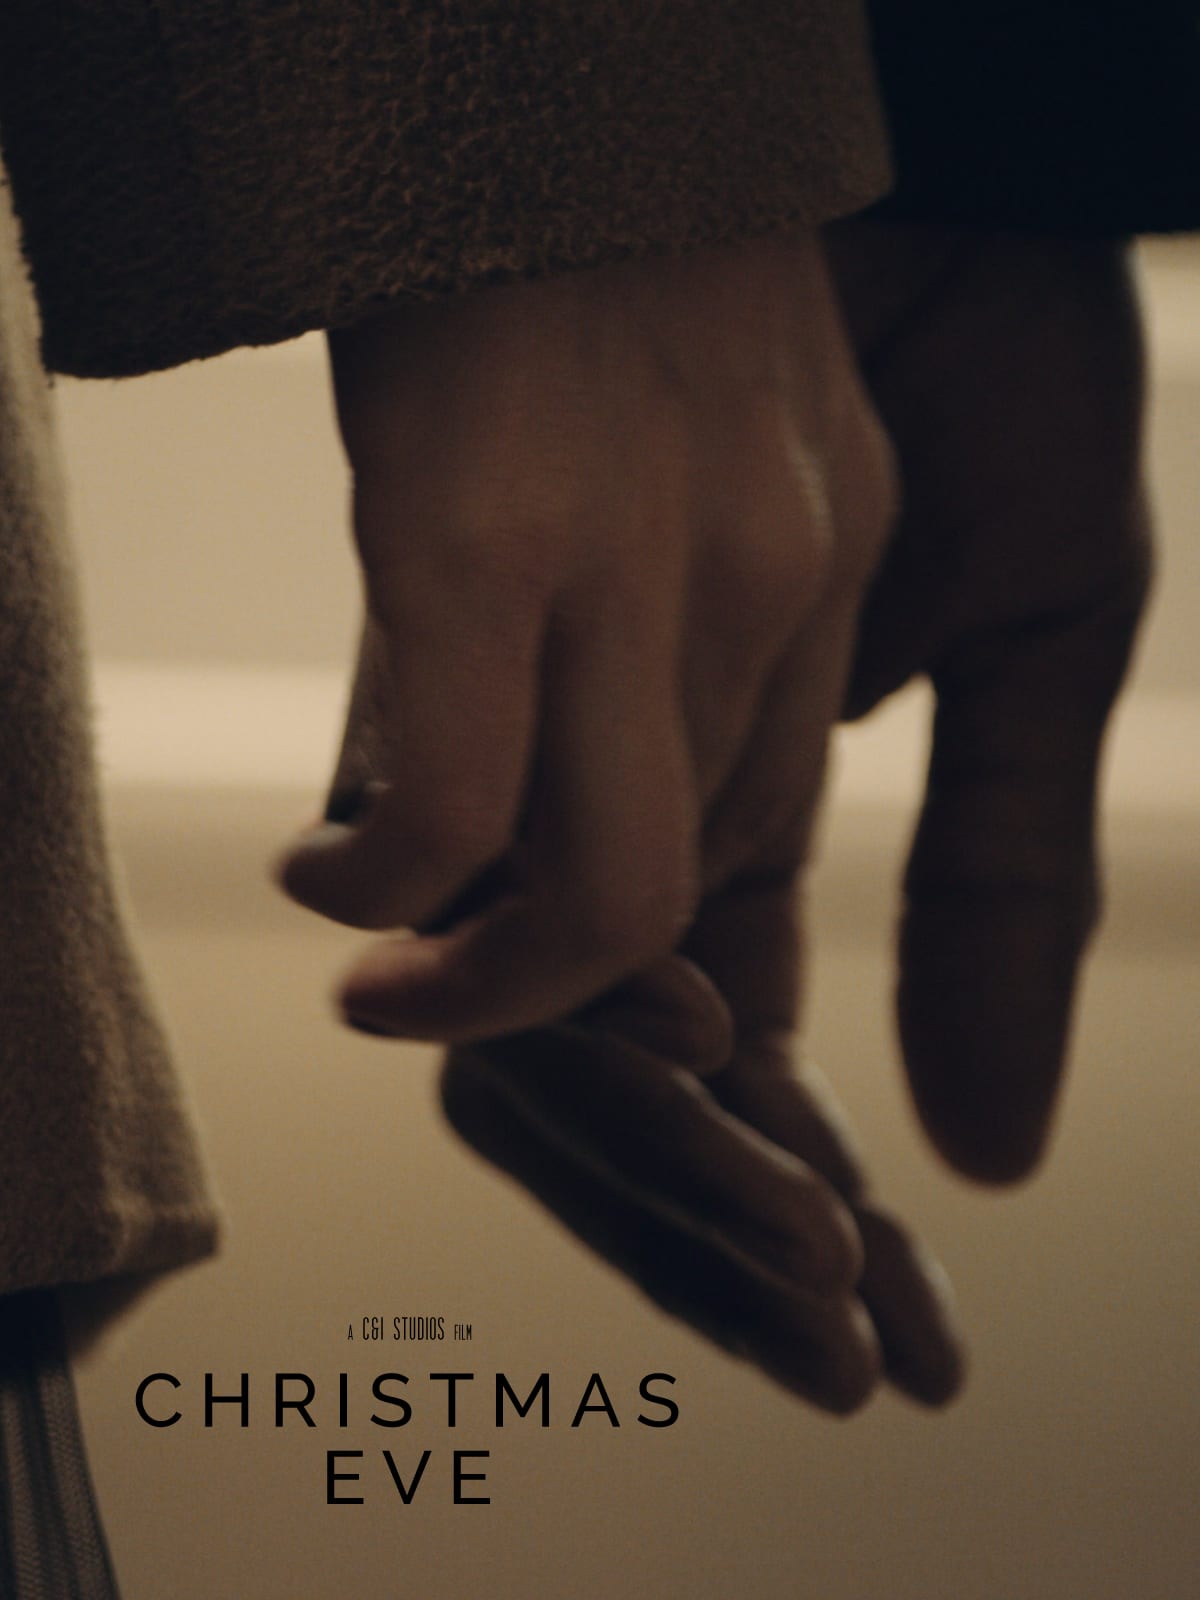 Feature Film Mastering of Christmas Eve a C&I Studios Short Film with title ad